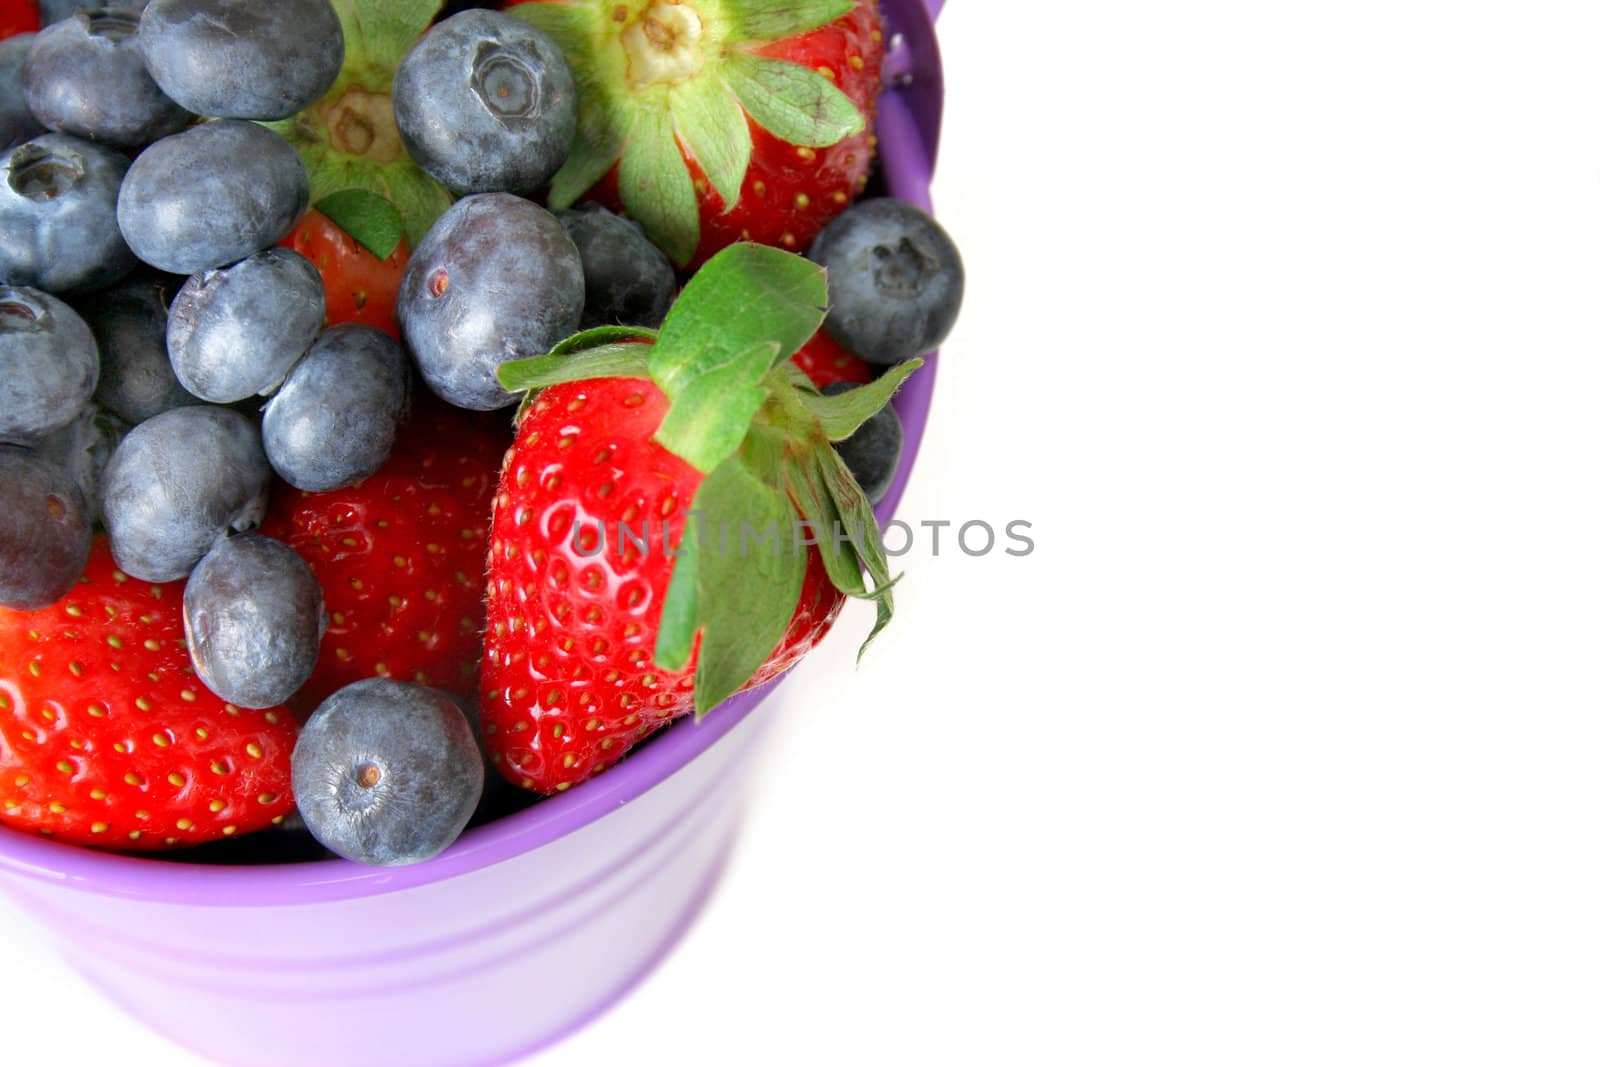 Blueberries and Strawberries by thephotoguy